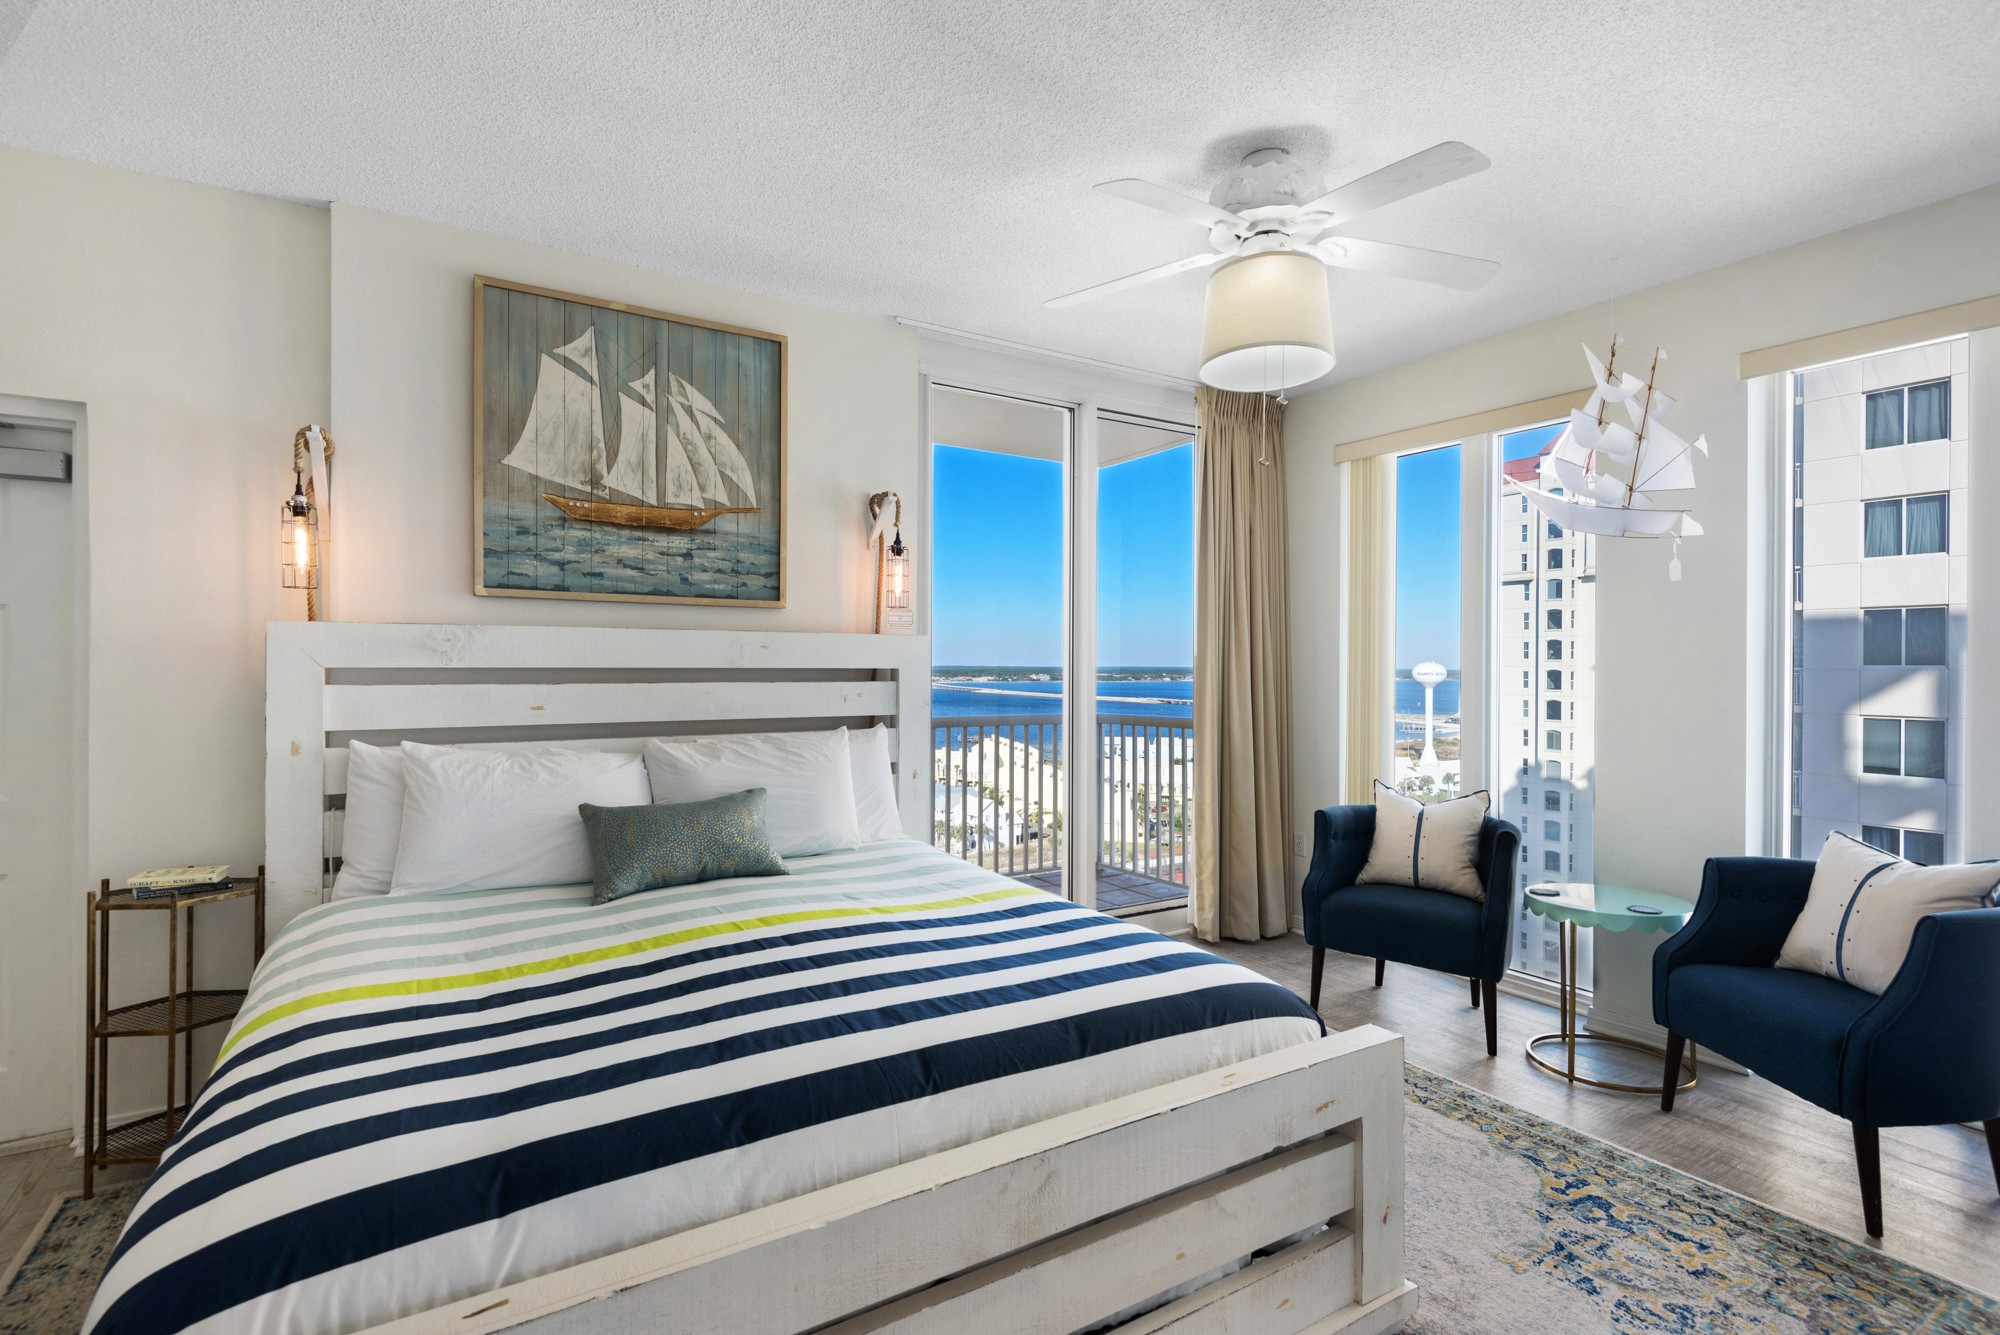 Second Master Suite with More Panoramic Views of the Gulf and Santa Rosa Sound